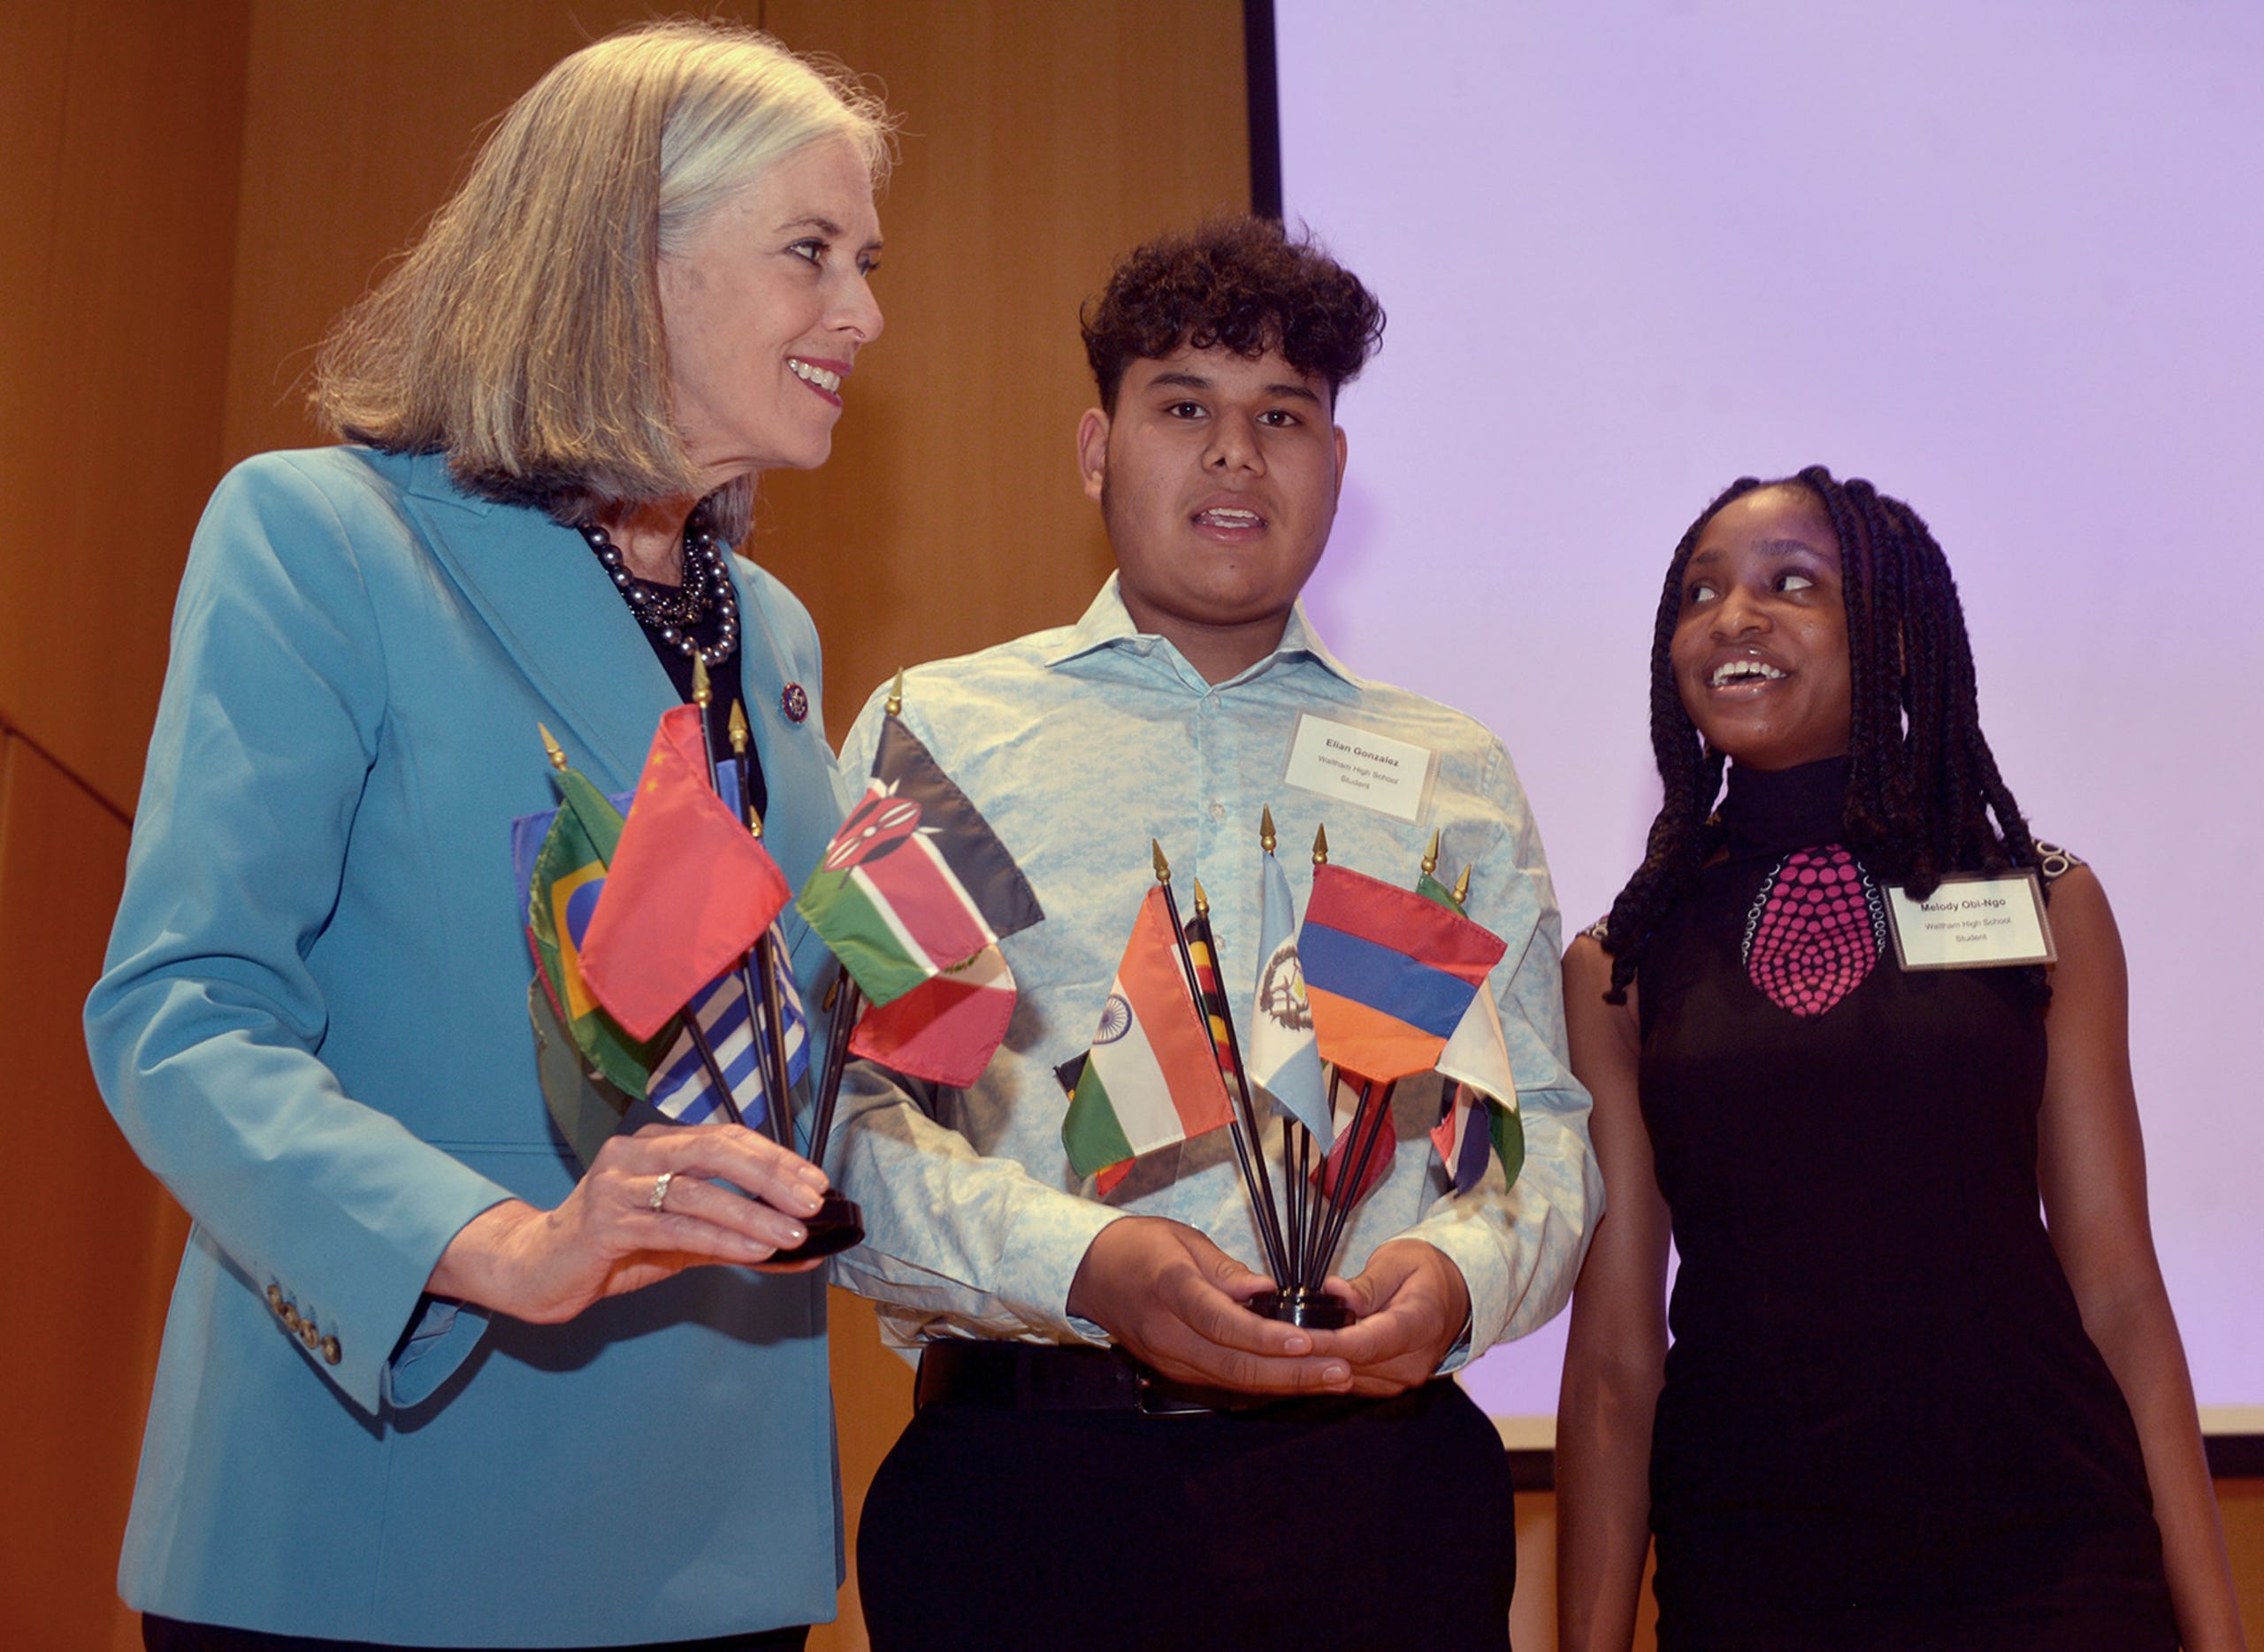 After Rep. Katherine Clark, Assistant House Speaker, announced a $600,000 expansion of the MetroWest Scholars Early Start program, early college funding for Waltham students,  at Framingham State University, May 3, 2022, Waltham students Elian Gonzalez and Melody Obi-Ngo, Waltham posed with Rep. Clark and flags they gave her as a gift.